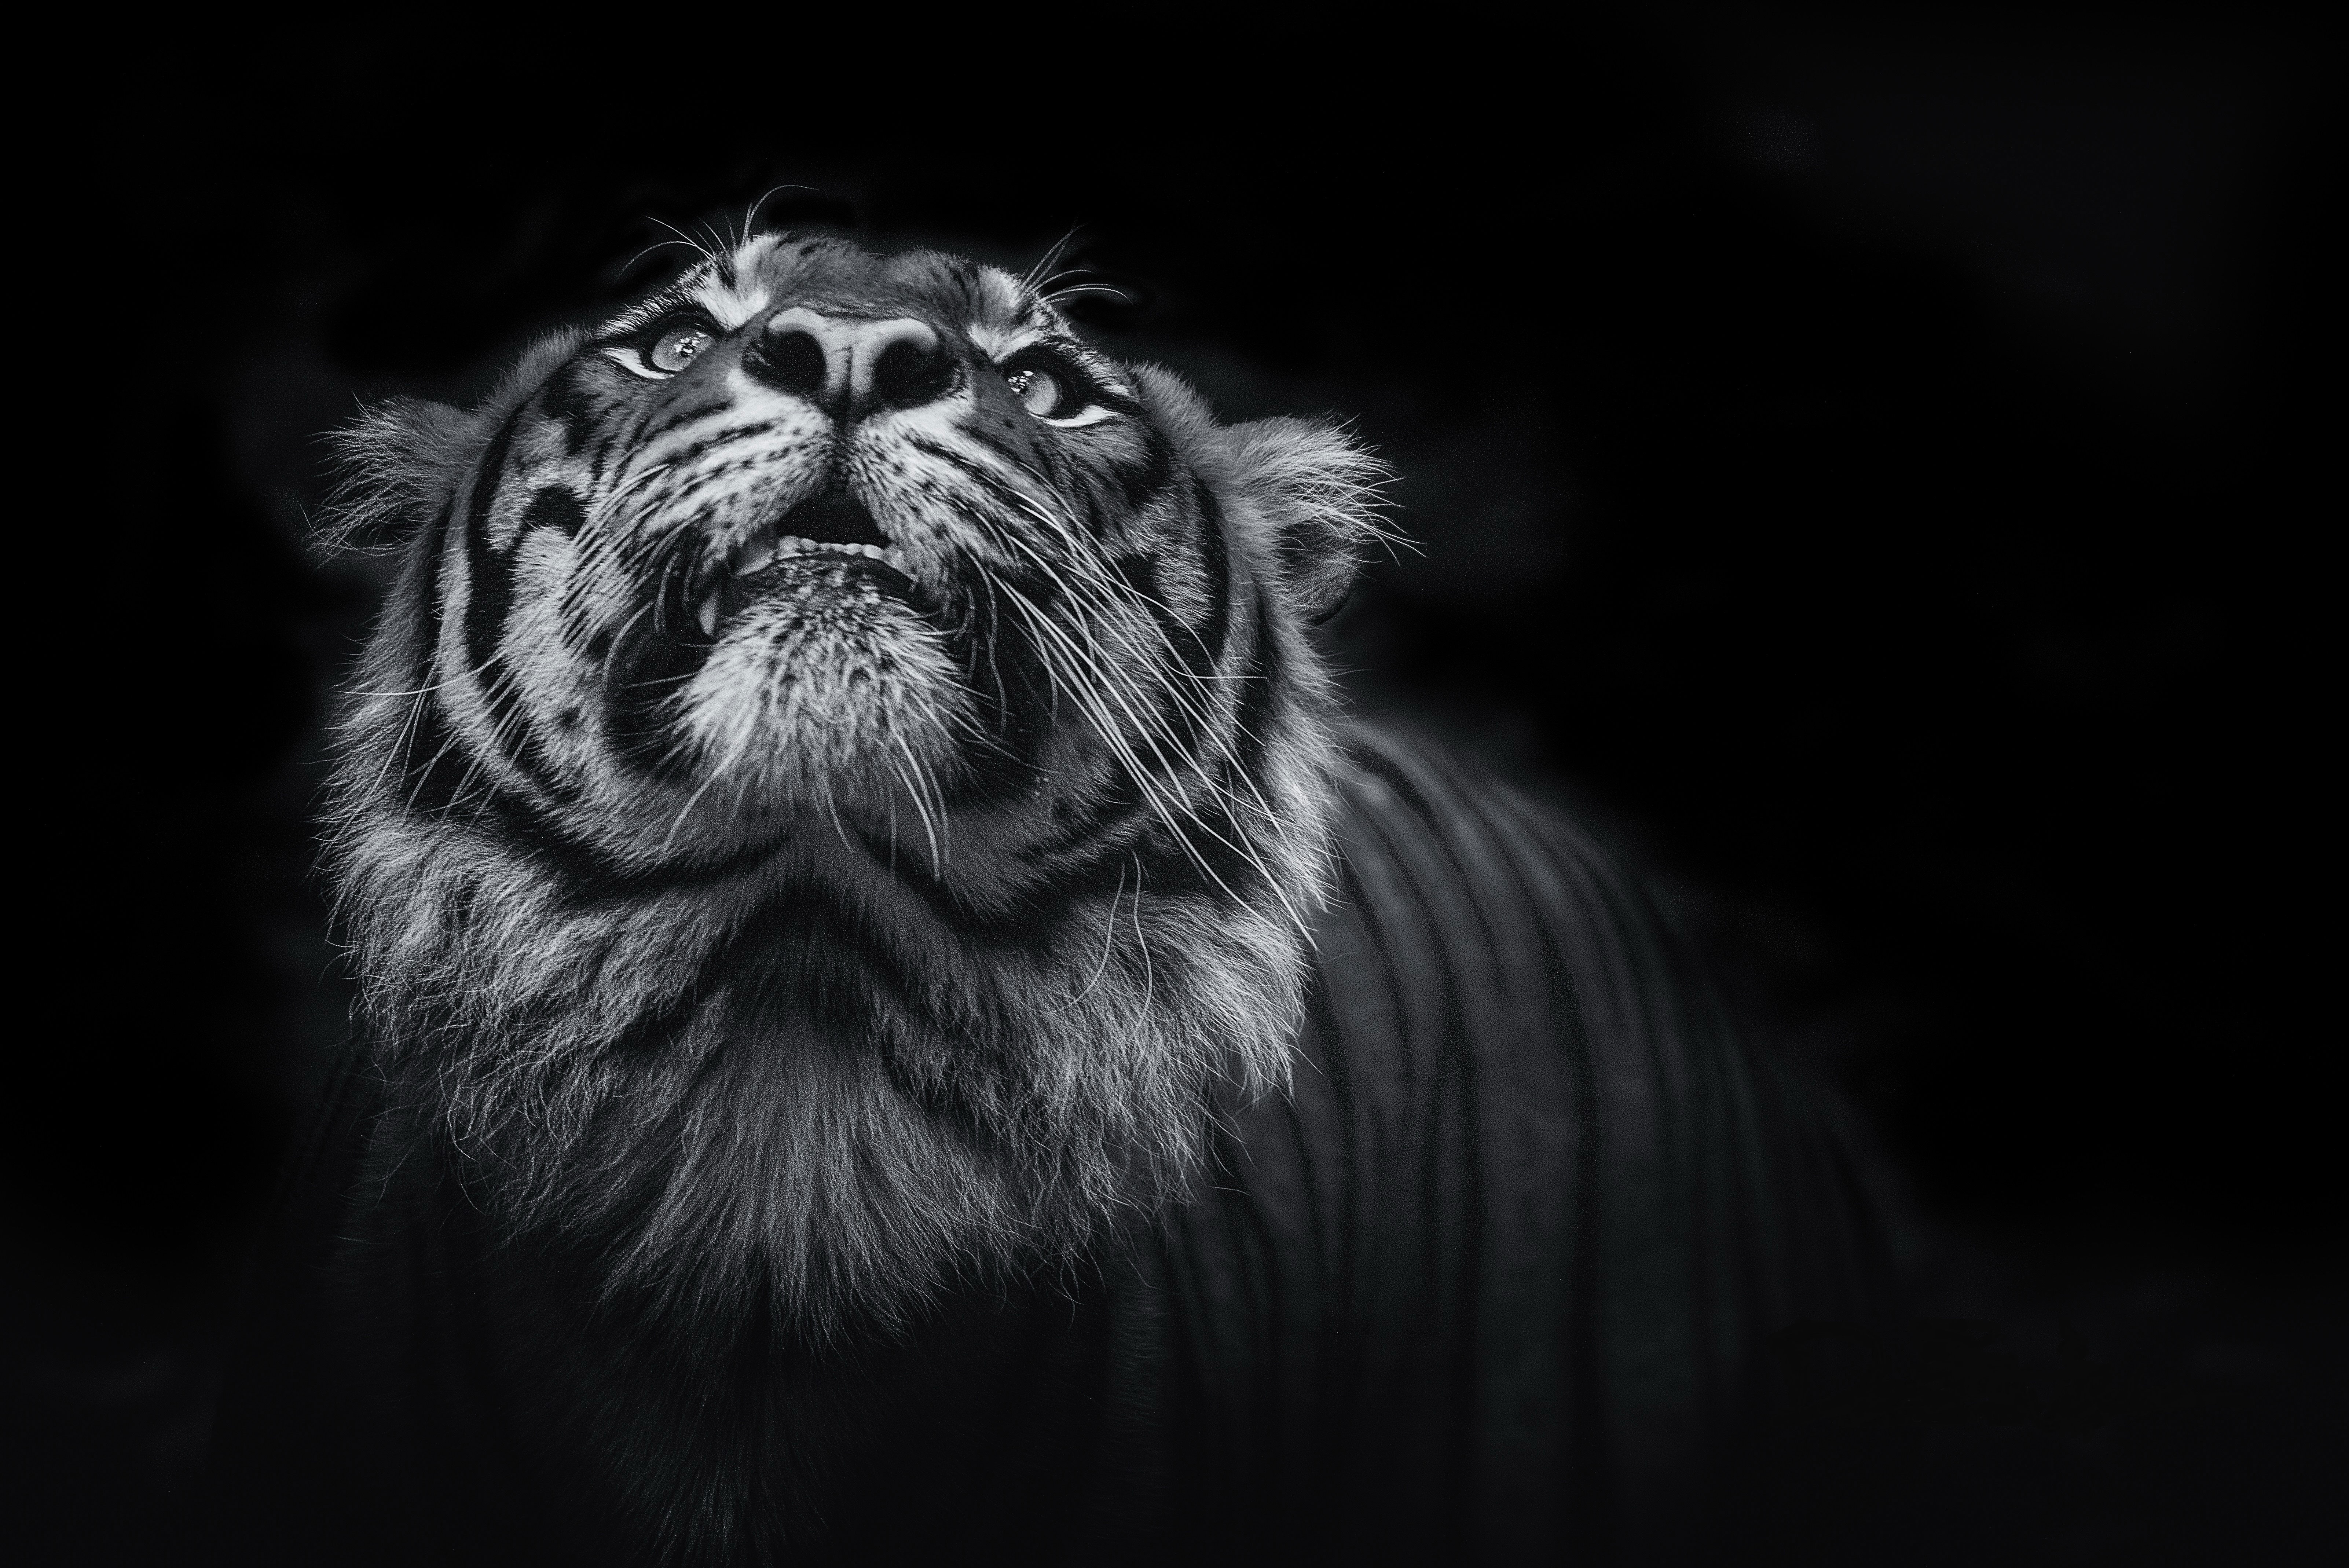 Wallpapers tiger animals monochrome on the desktop